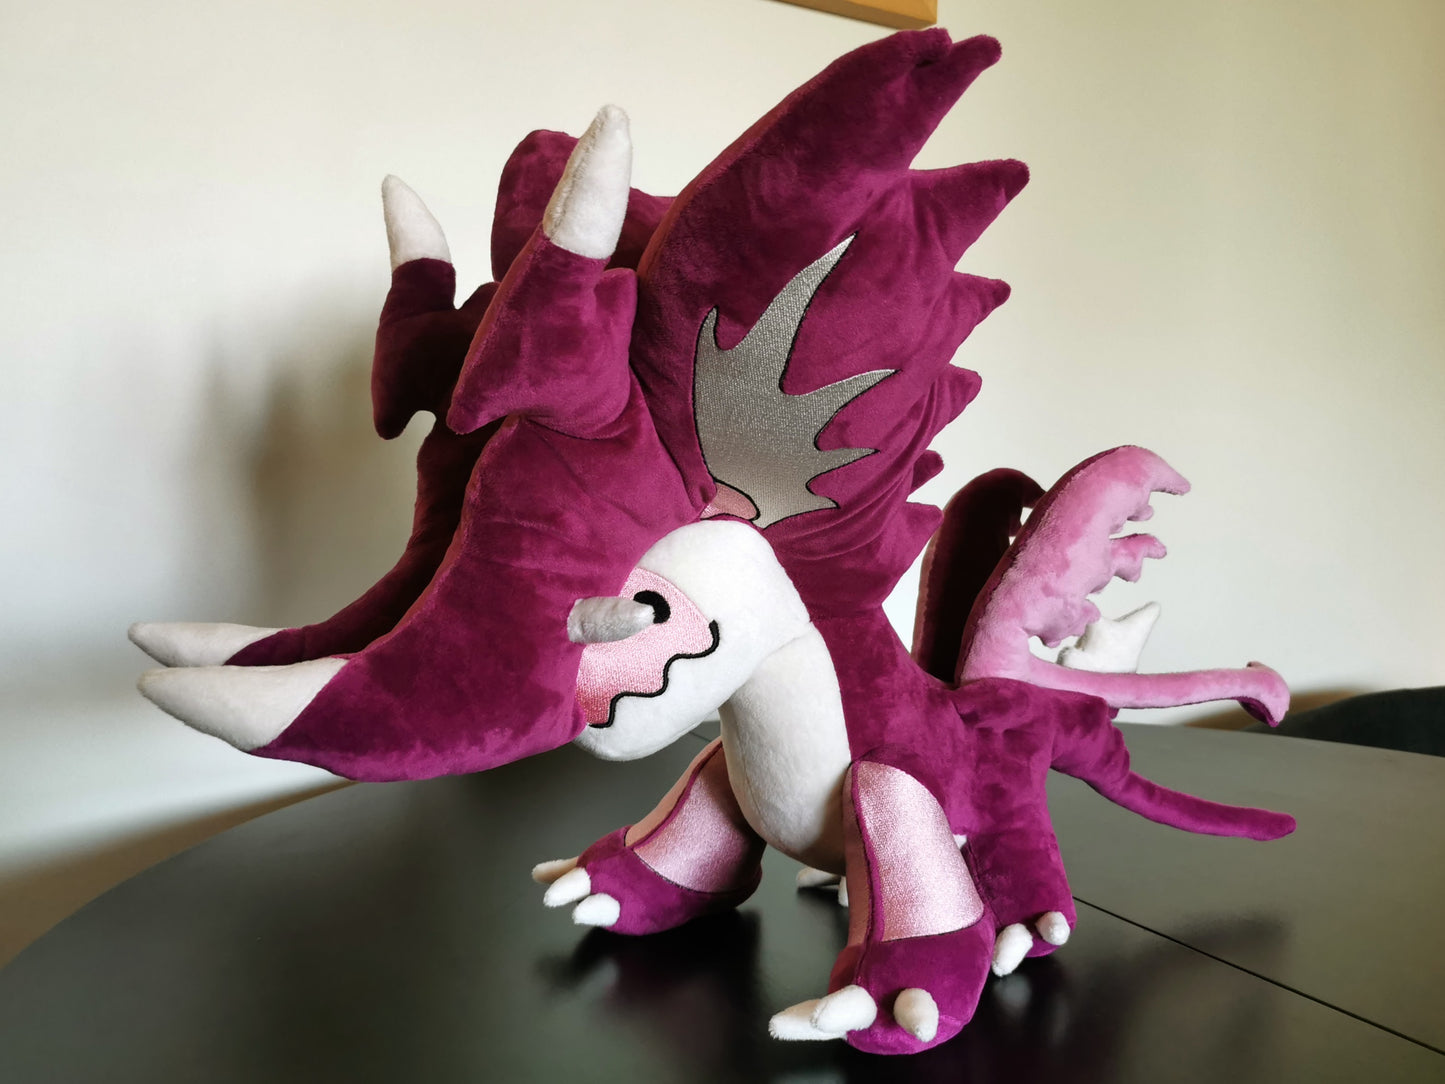 Pink dragon inspired by Veidreki from “Dragon Adventures” on Roblox, custom storm dragon, weighted beads plush 60cm